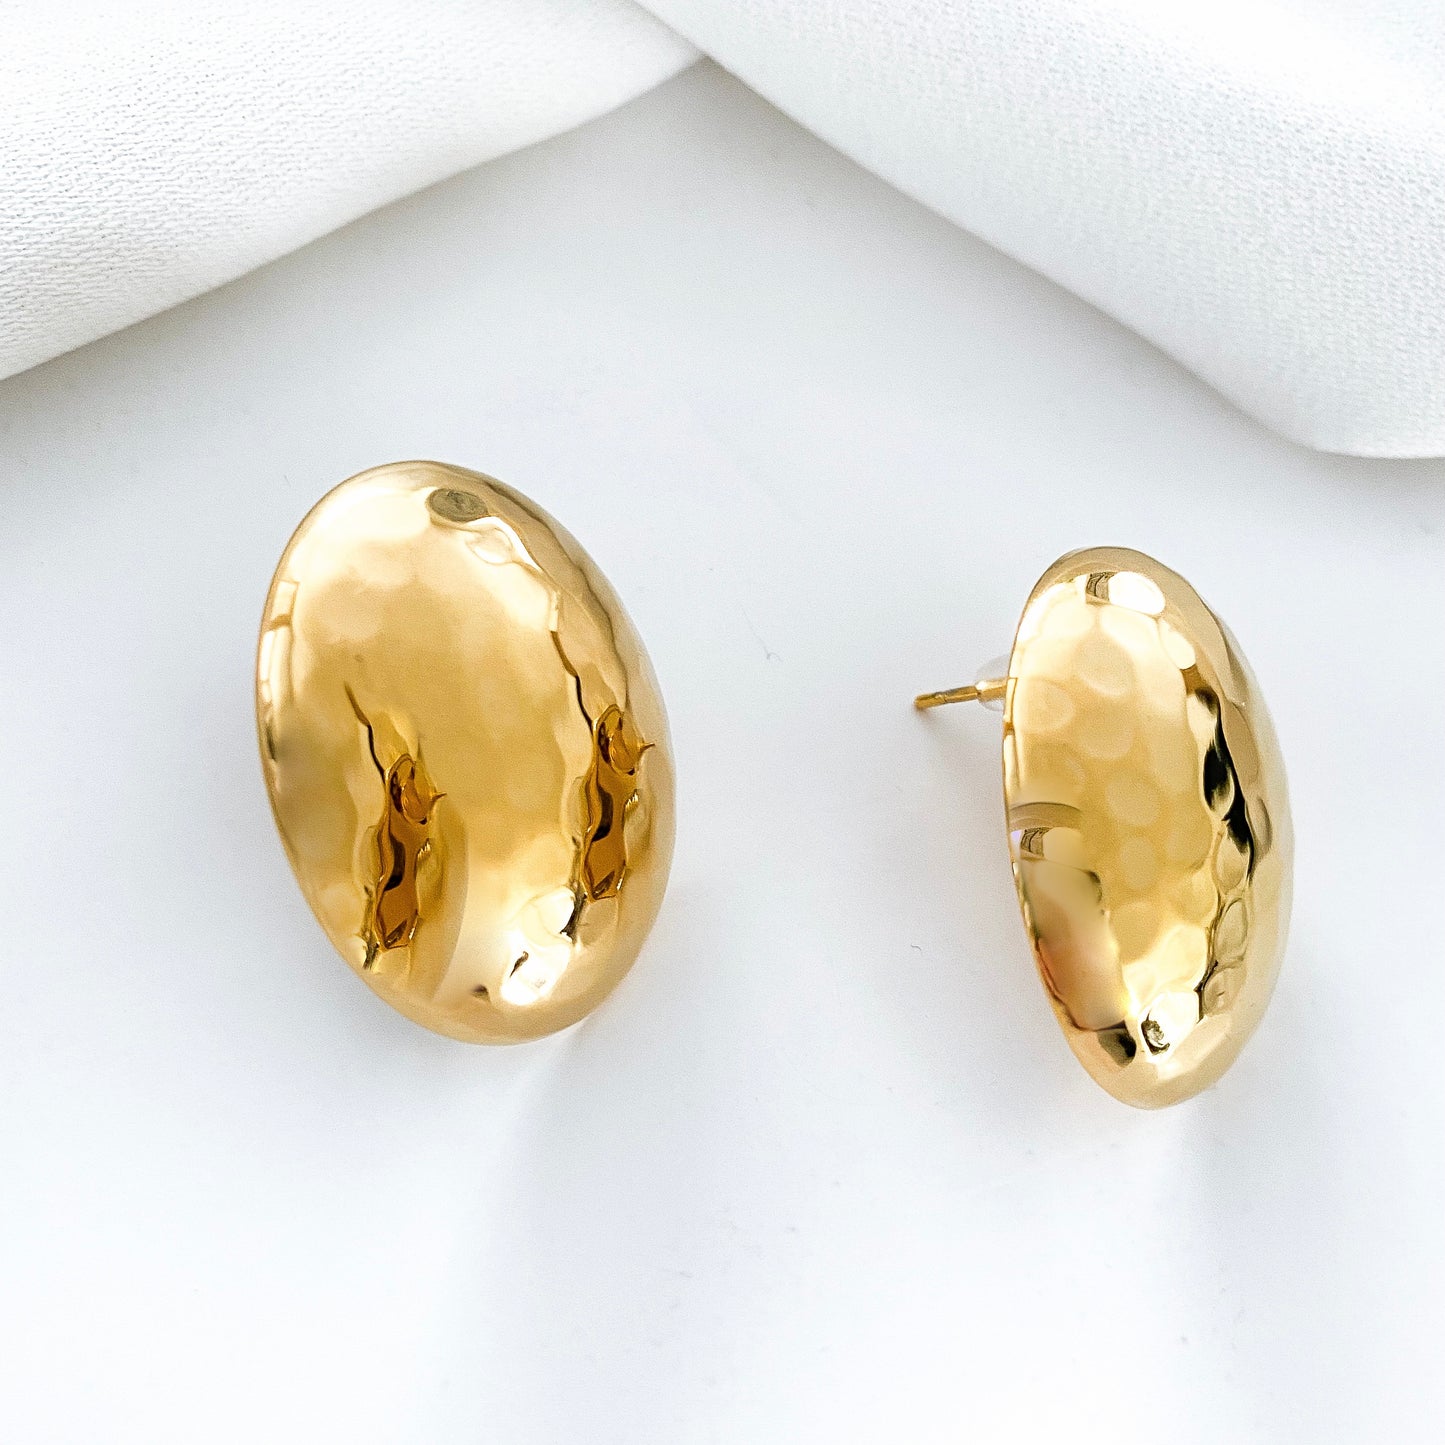 Round Speckled Gold Earrings